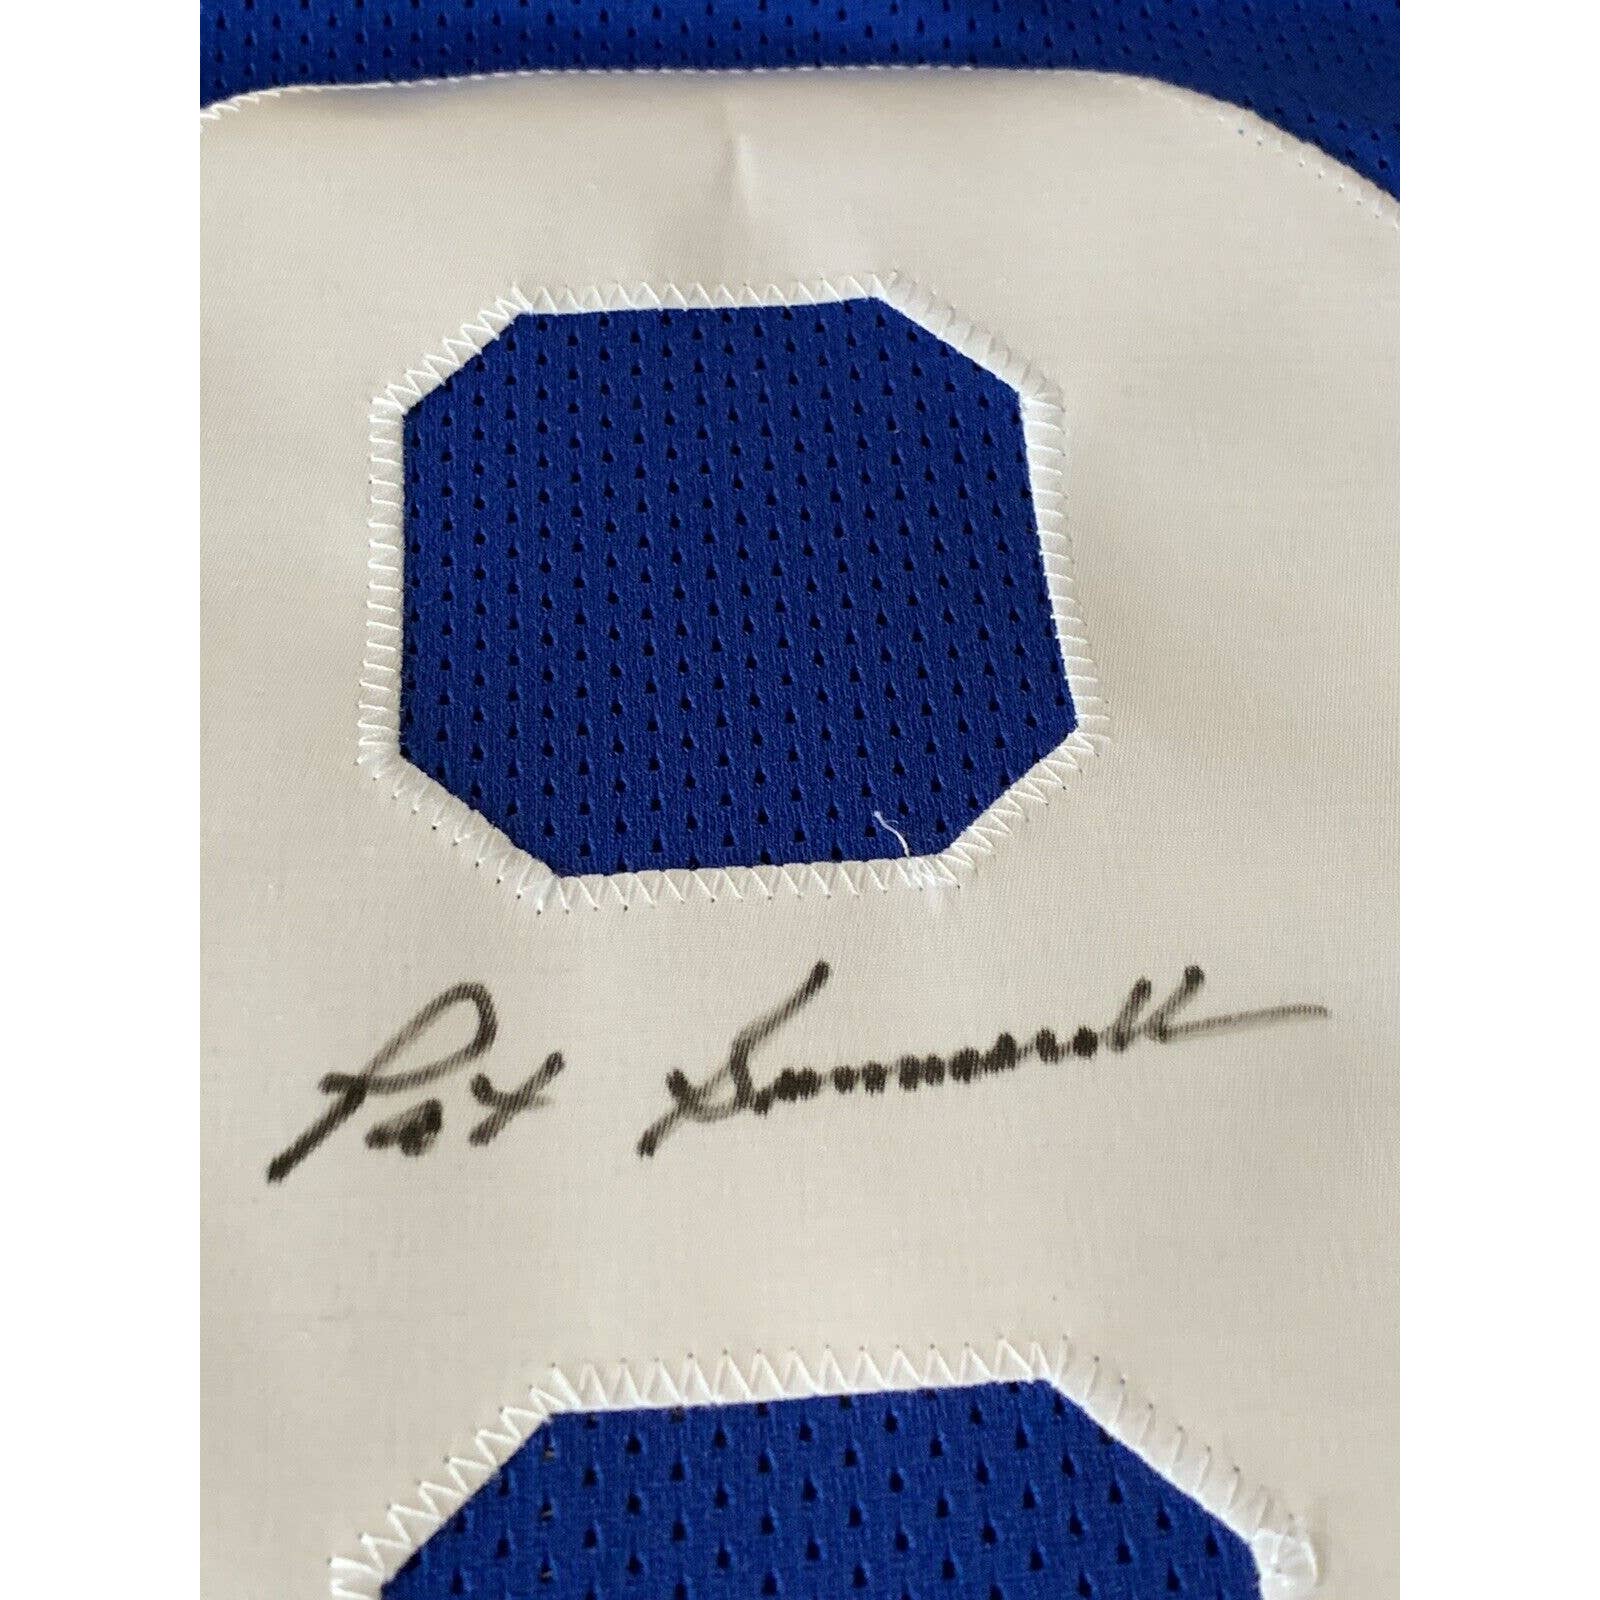 Pat Summerall Autographed/Signed Jersey PSA/DNA COA New York Giants - TreasuresEvolved